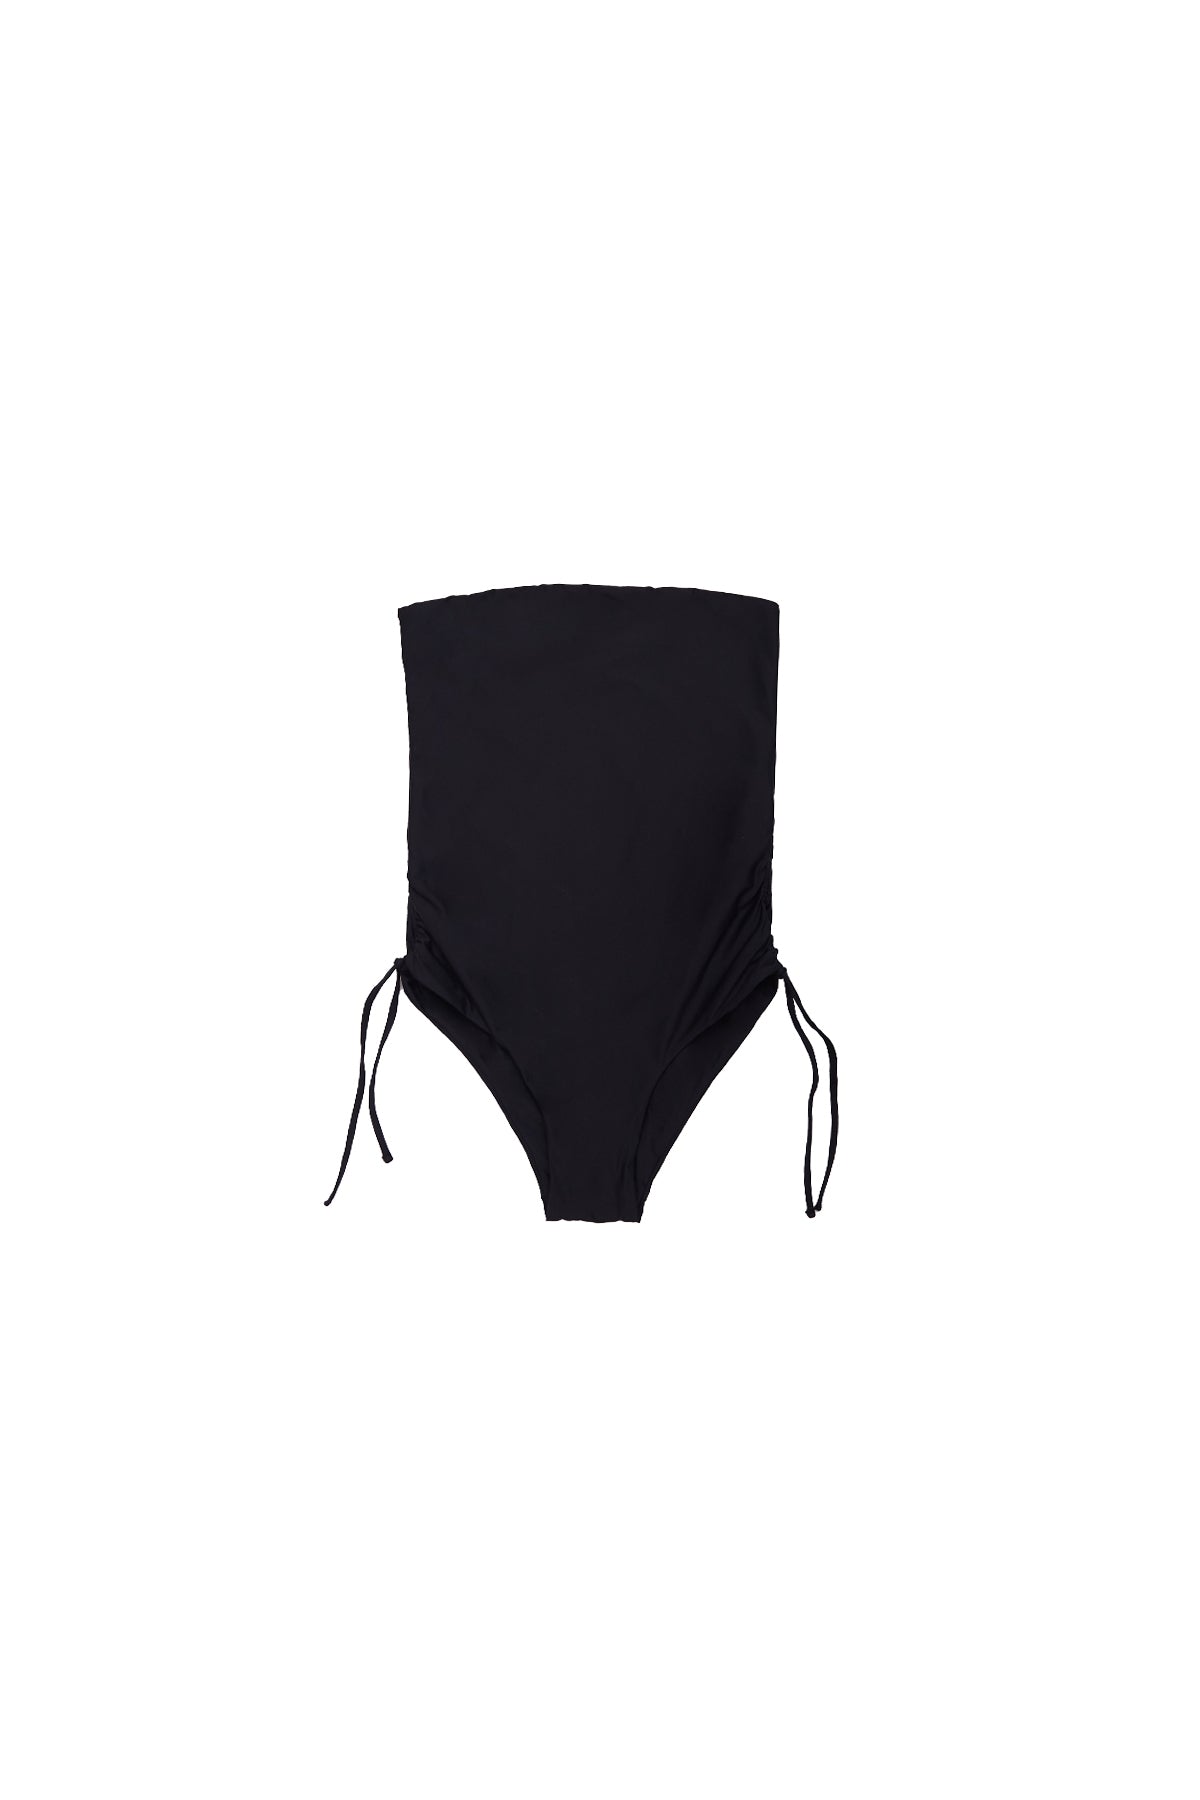 The Classic One Piece Black